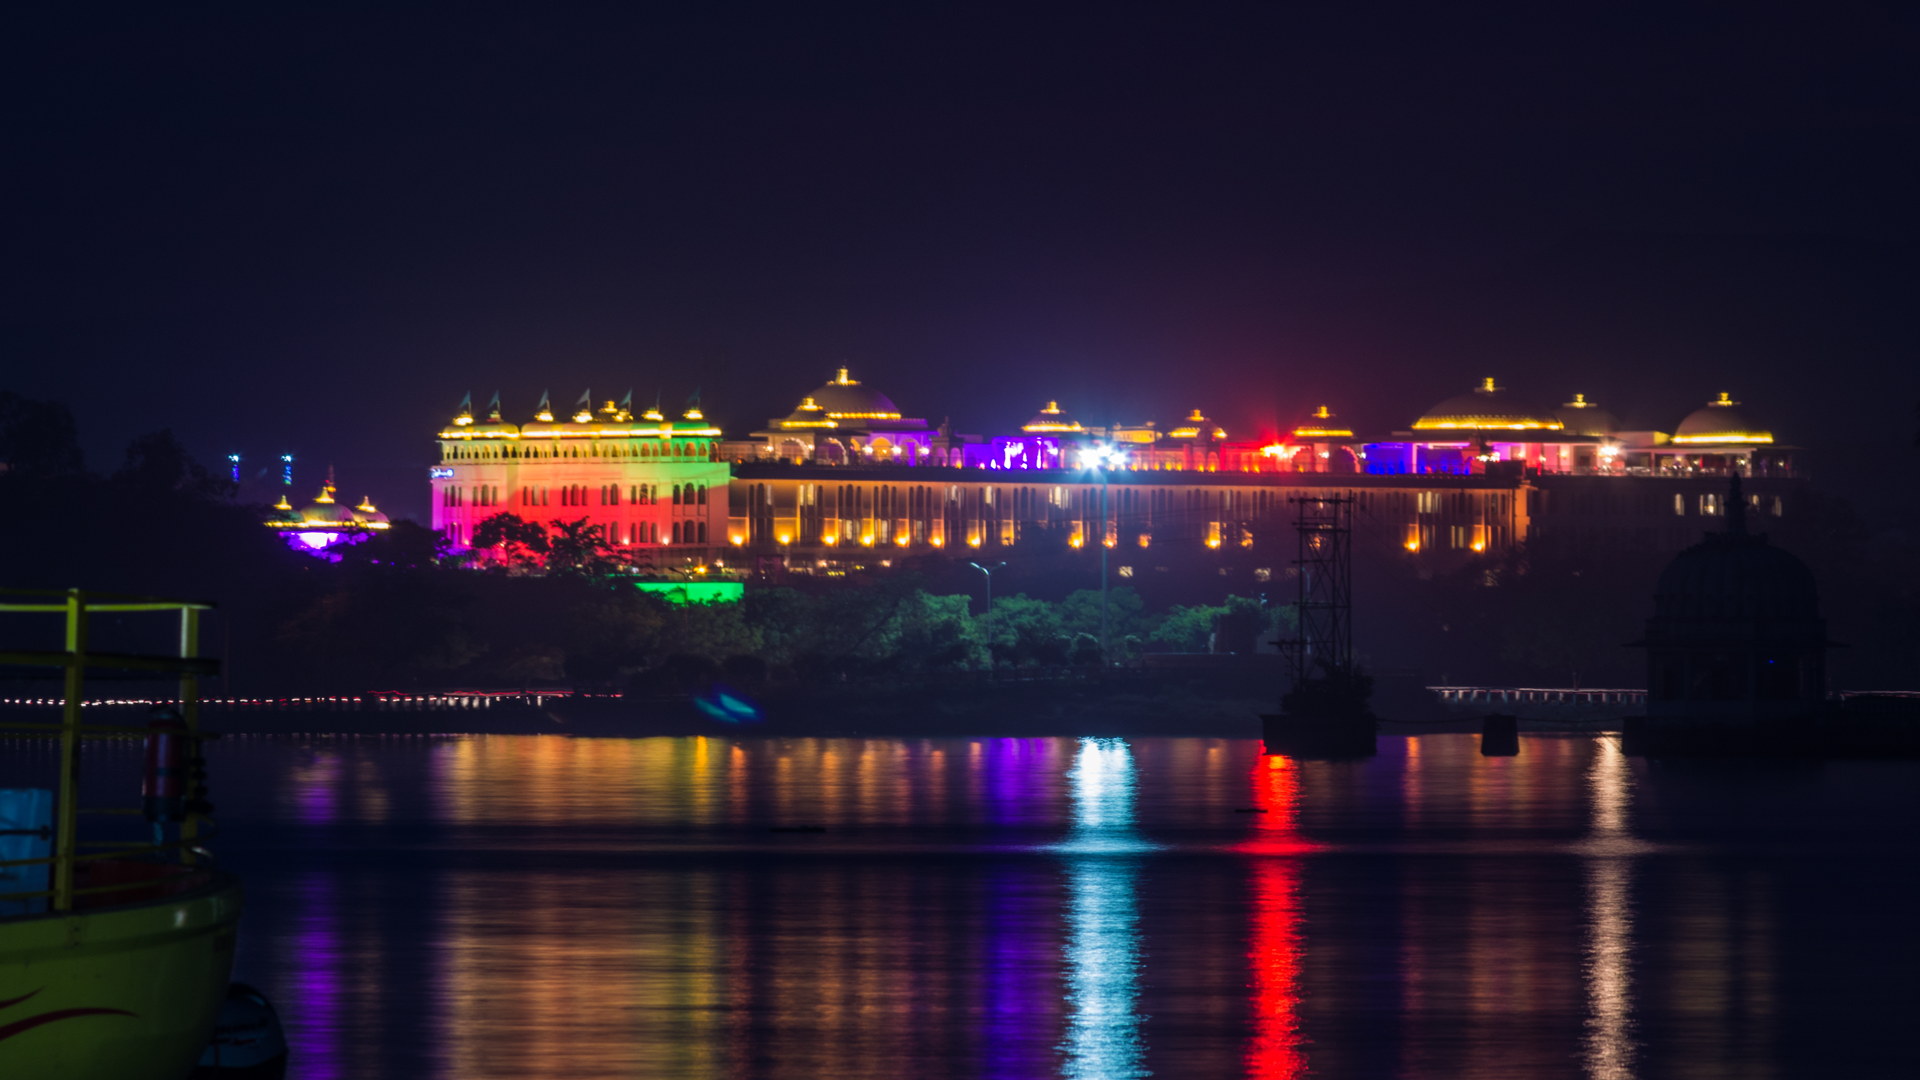 The Radisson Blu in Udaipur, Rajasthan Places to visit in Jaipur in night